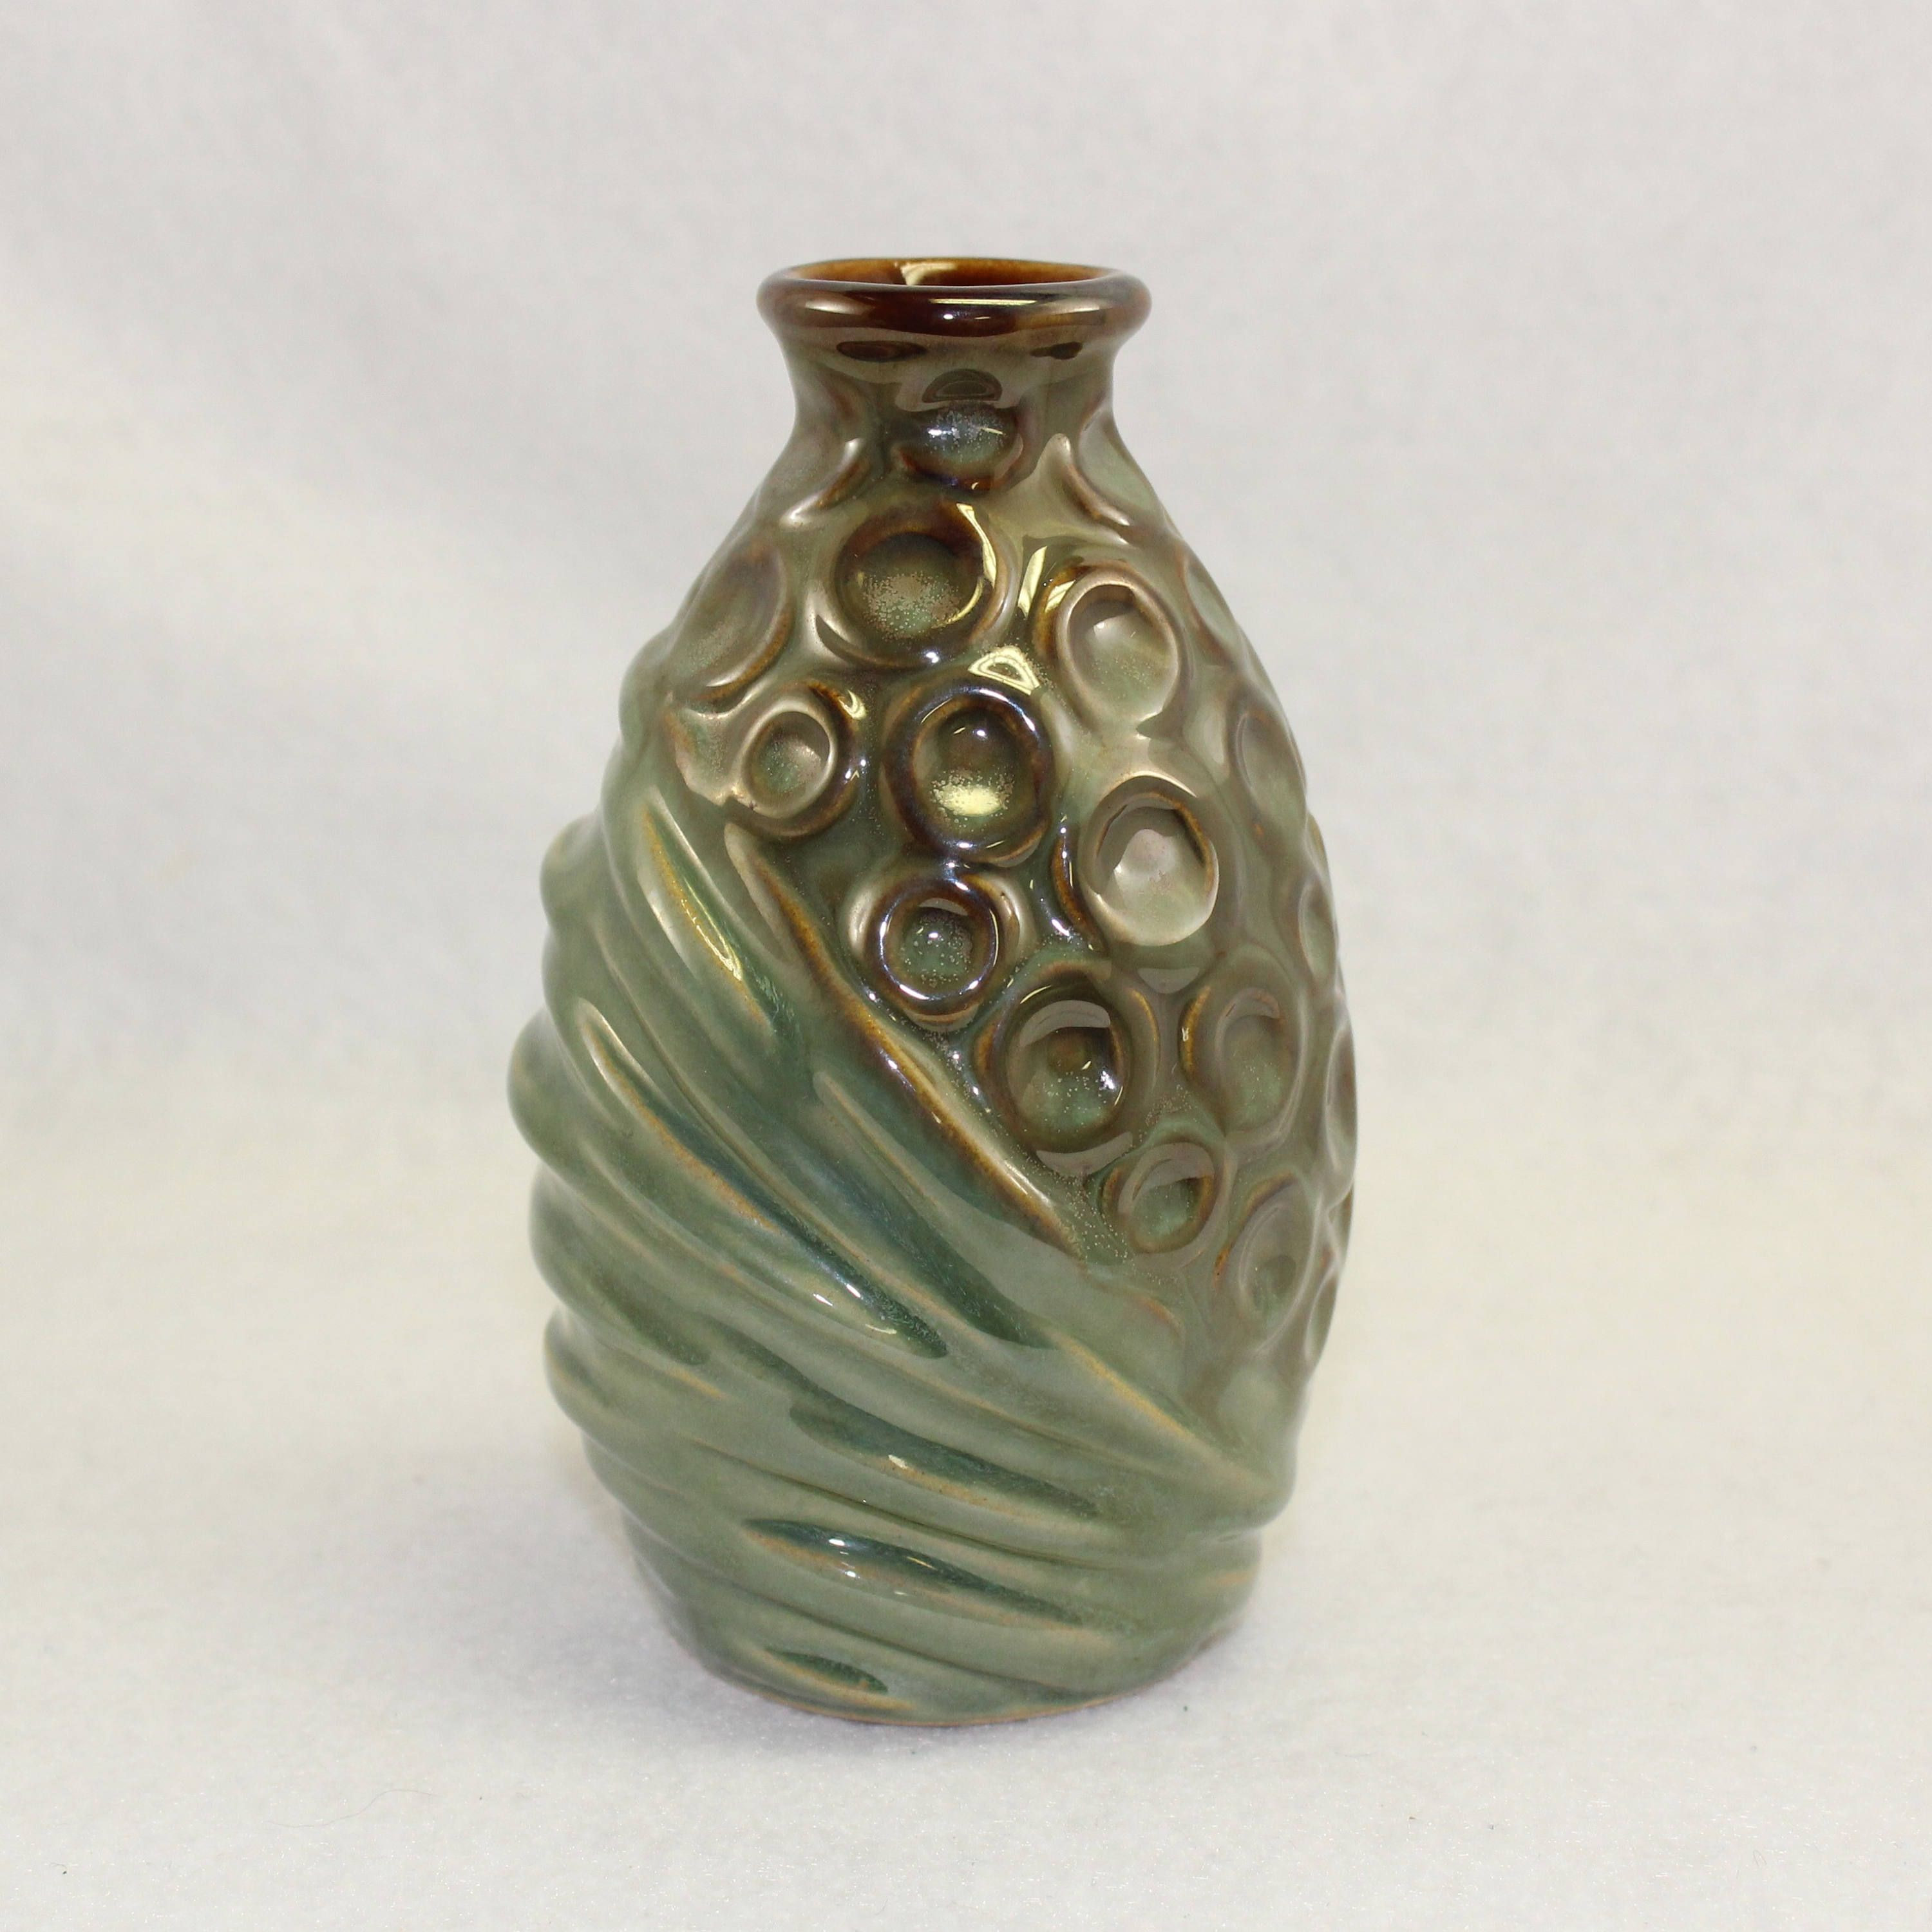 24 Popular Antique Green Pottery Vase 2024 free download antique green pottery vase of vintage green ceramic vase mid century mad men look great intended for vintage green ceramic vase mid century mad men look great conditiondifferent size circles